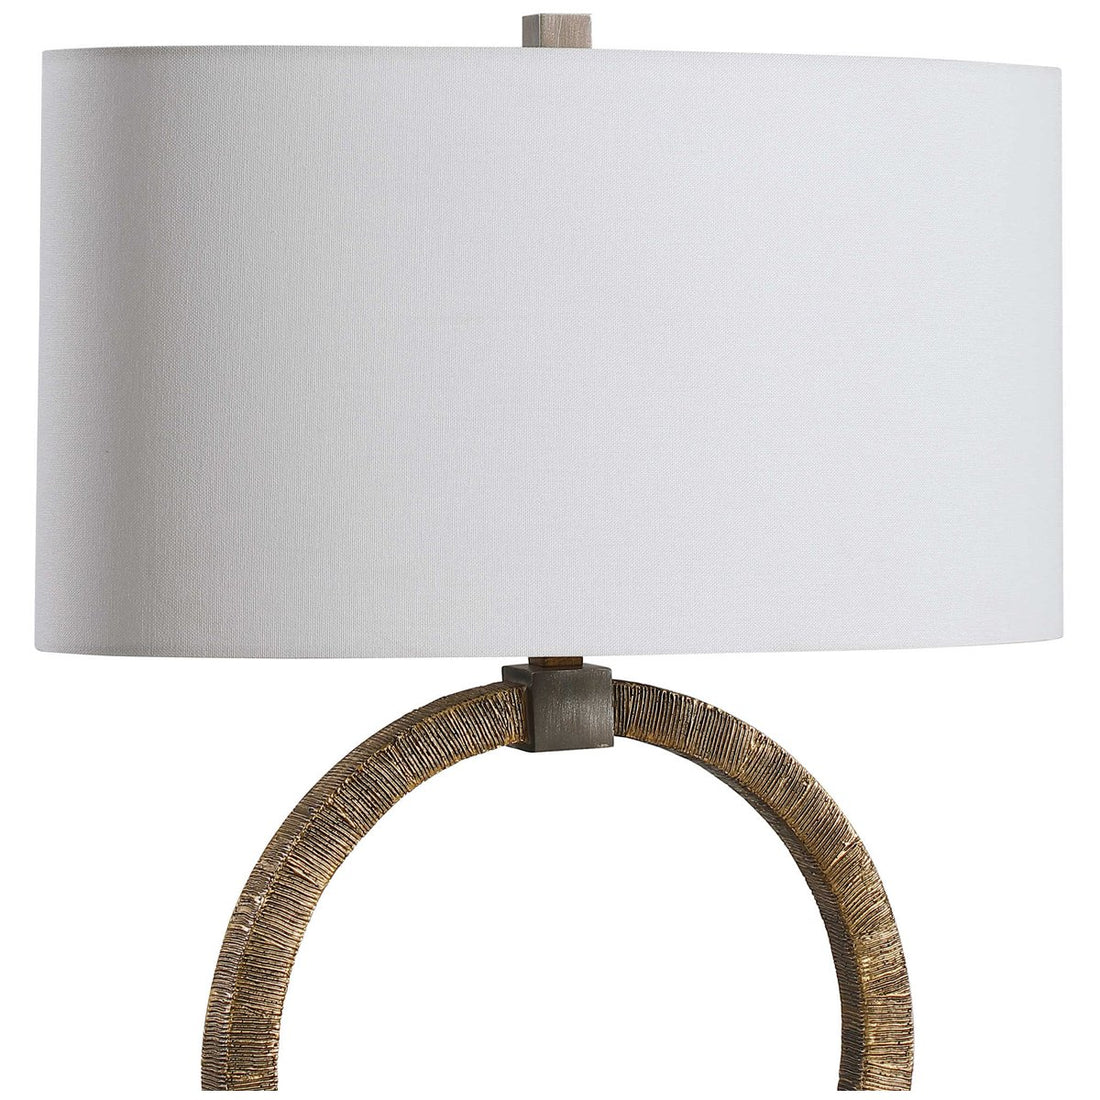 Uttermost Relic Aged Gold Table Lamp